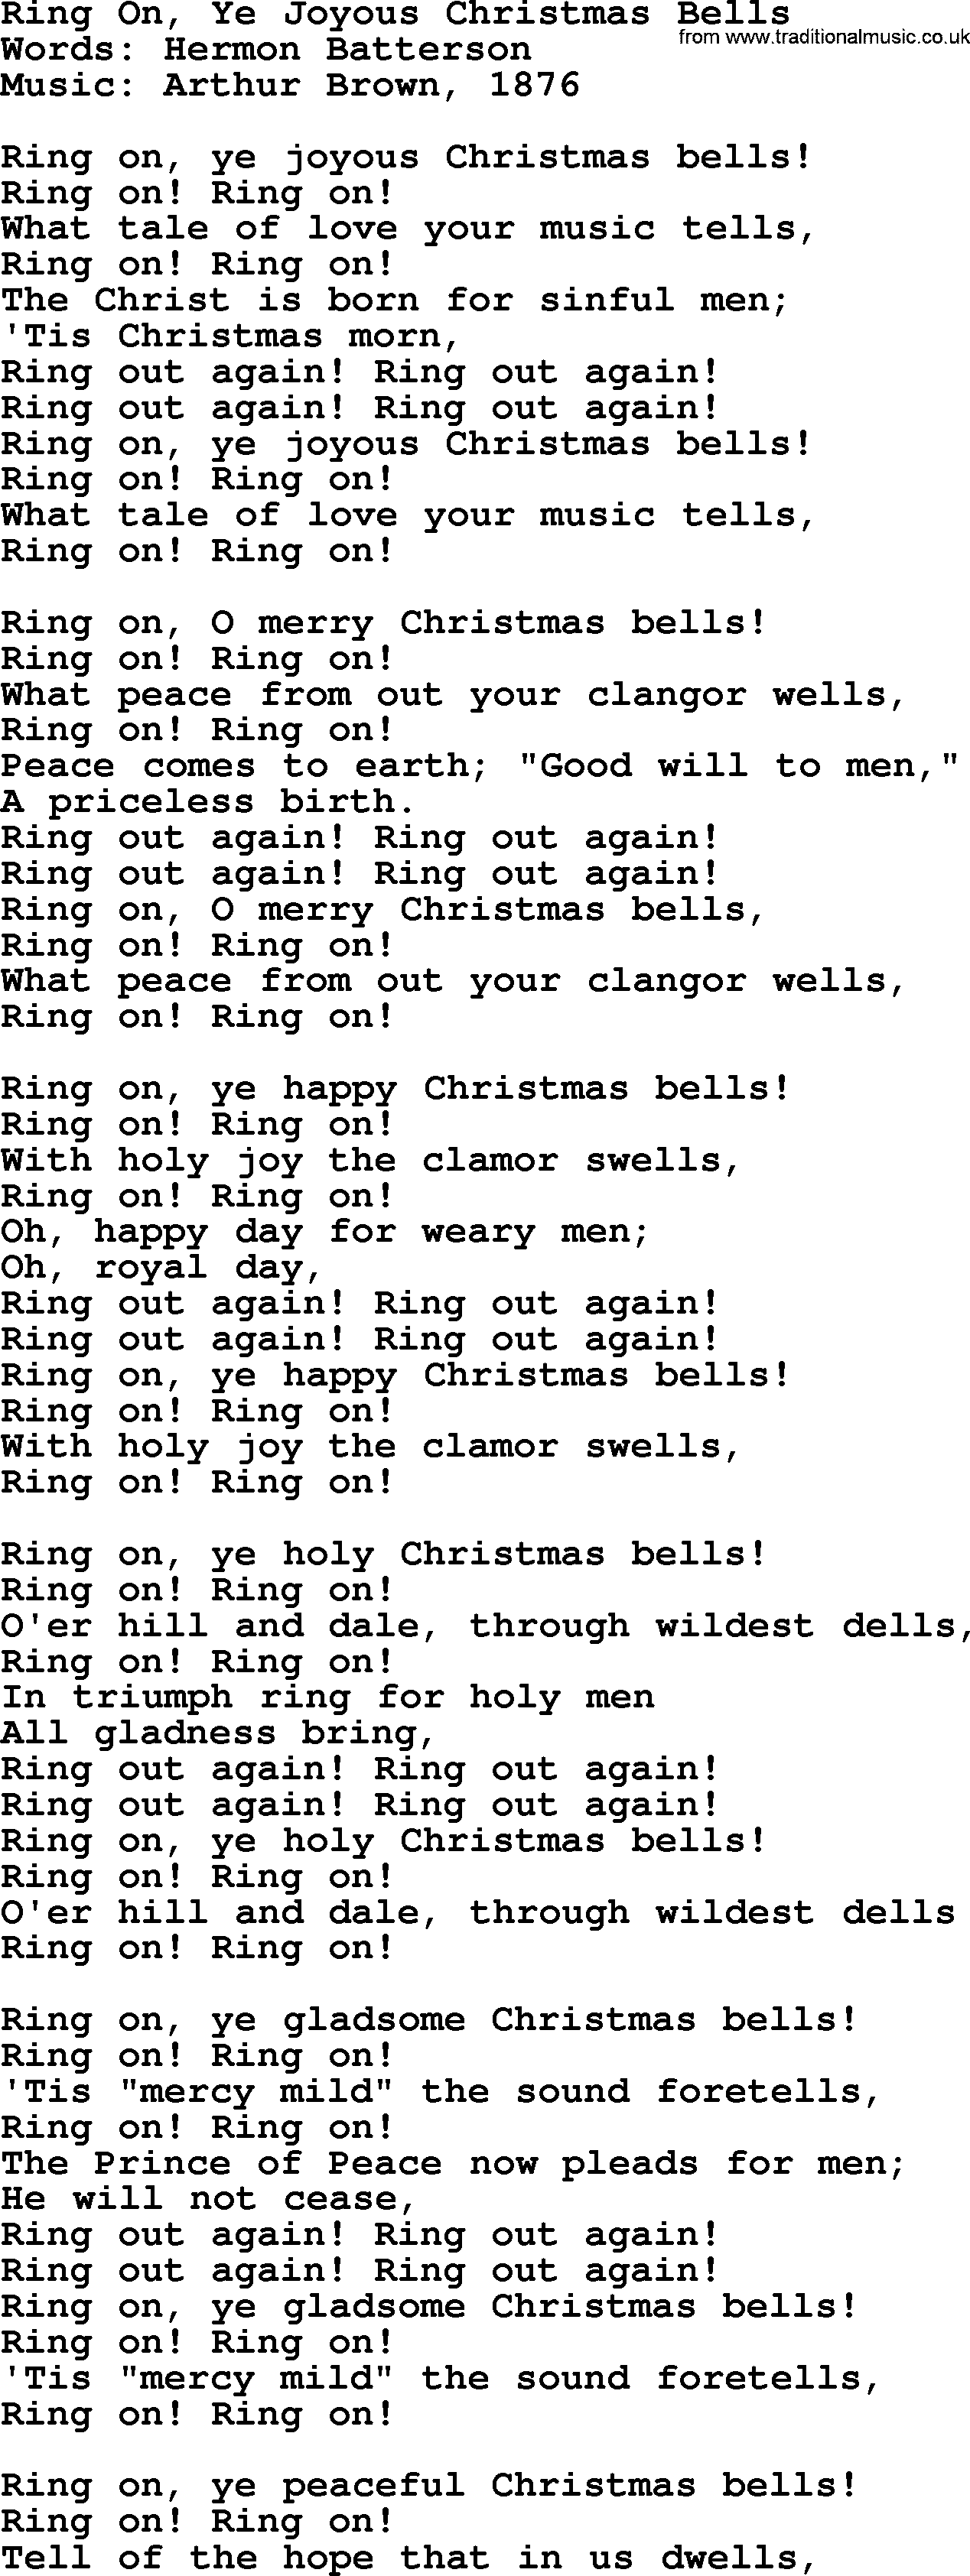 280 Christmas Hymns and songs with PowerPoints and PDF, title: Ring On, Ye Joyous Christmas Bells, lyrics, PPT and PDF